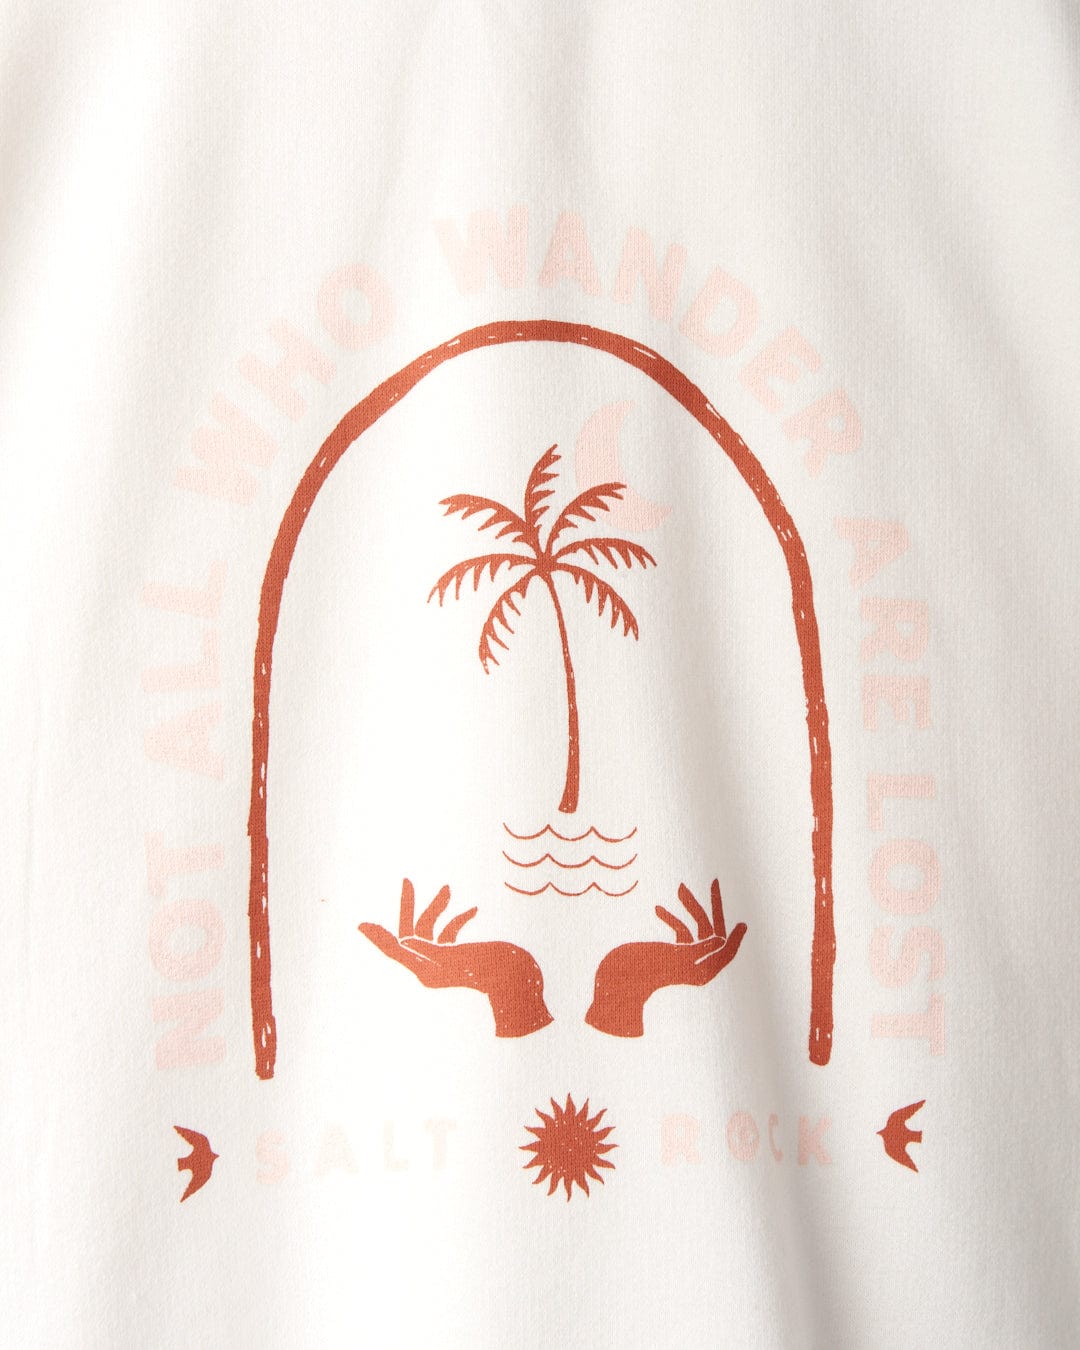 Illustration of a palm tree within an arch, flanked by two outstretched hands. The phrase "Not All Who Wander Are Lost" encircles the design, with "Salt Rock" below it. Perfect for your new 100% cotton Saltrock Palmera - Womens Pop Hoodie - Cream with a cozy contrast hood.